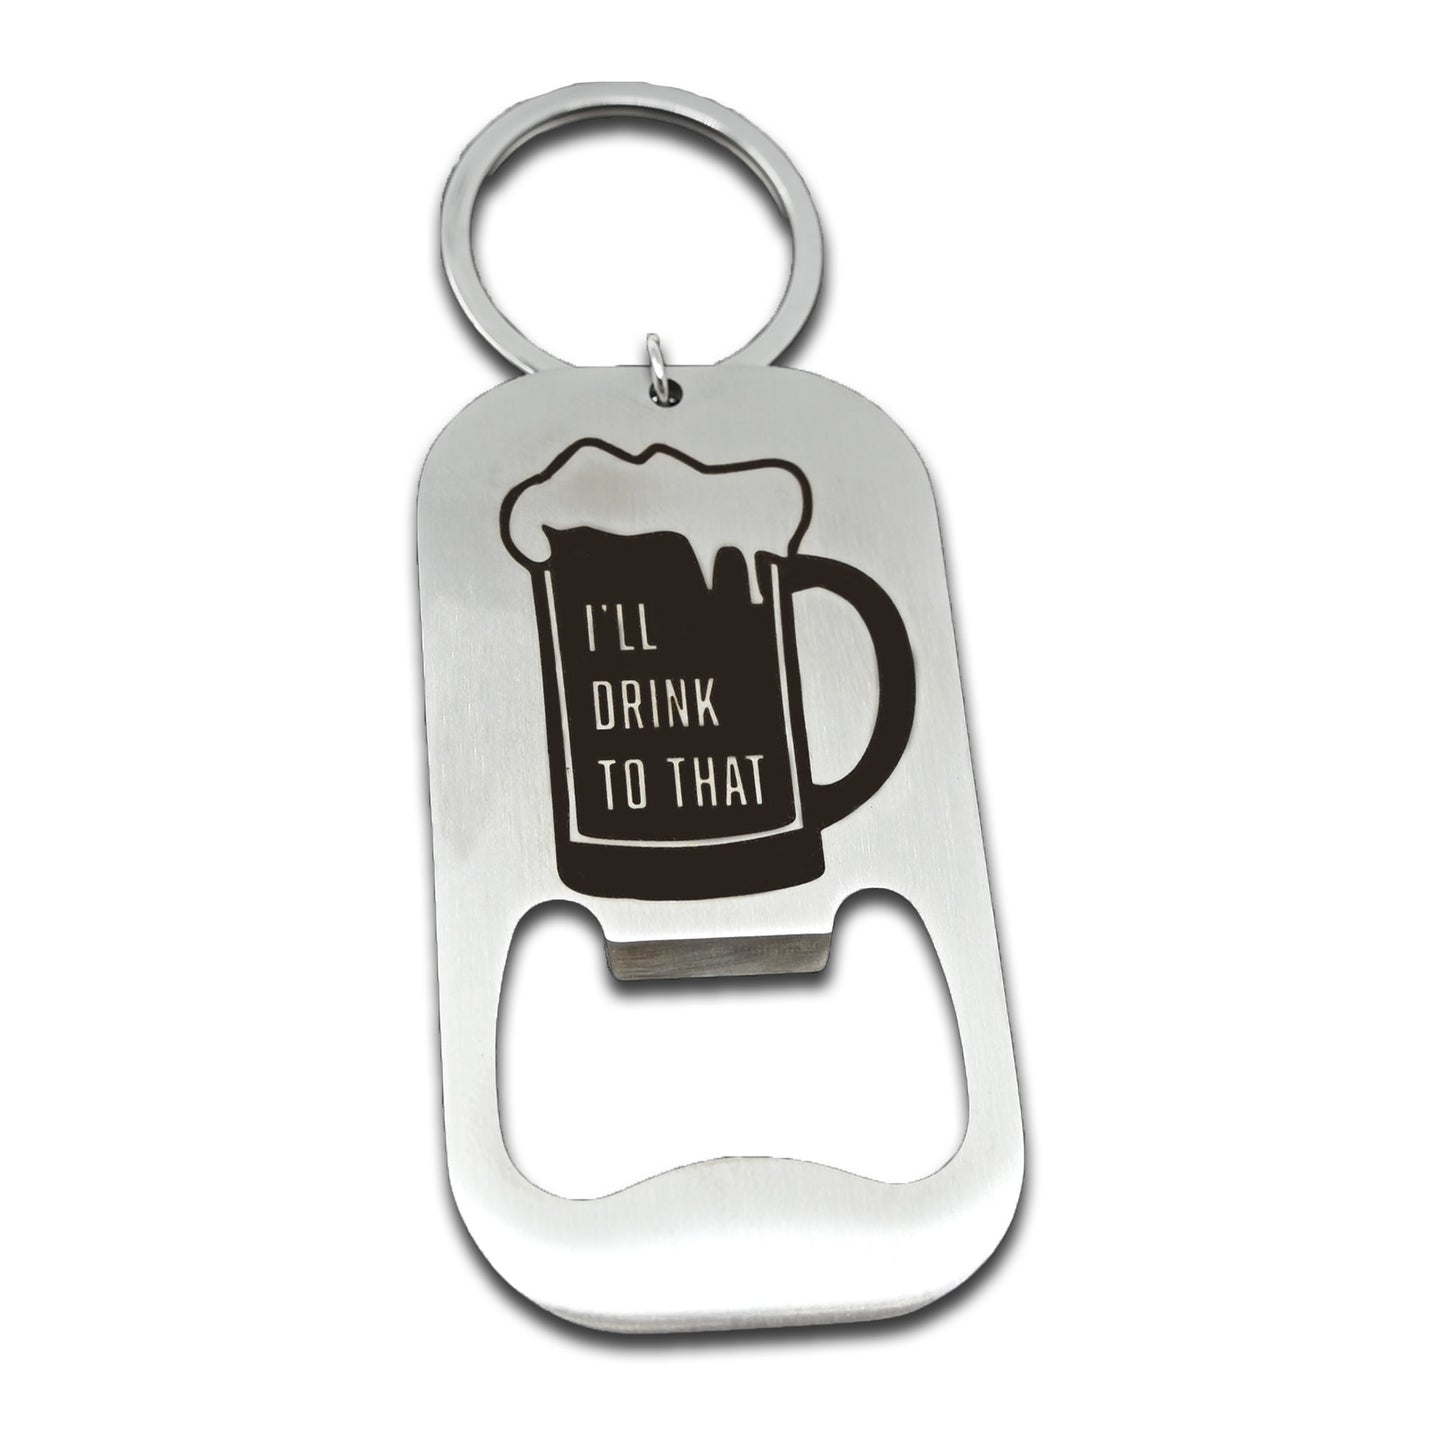 I'll Drink To That Bottle Opener